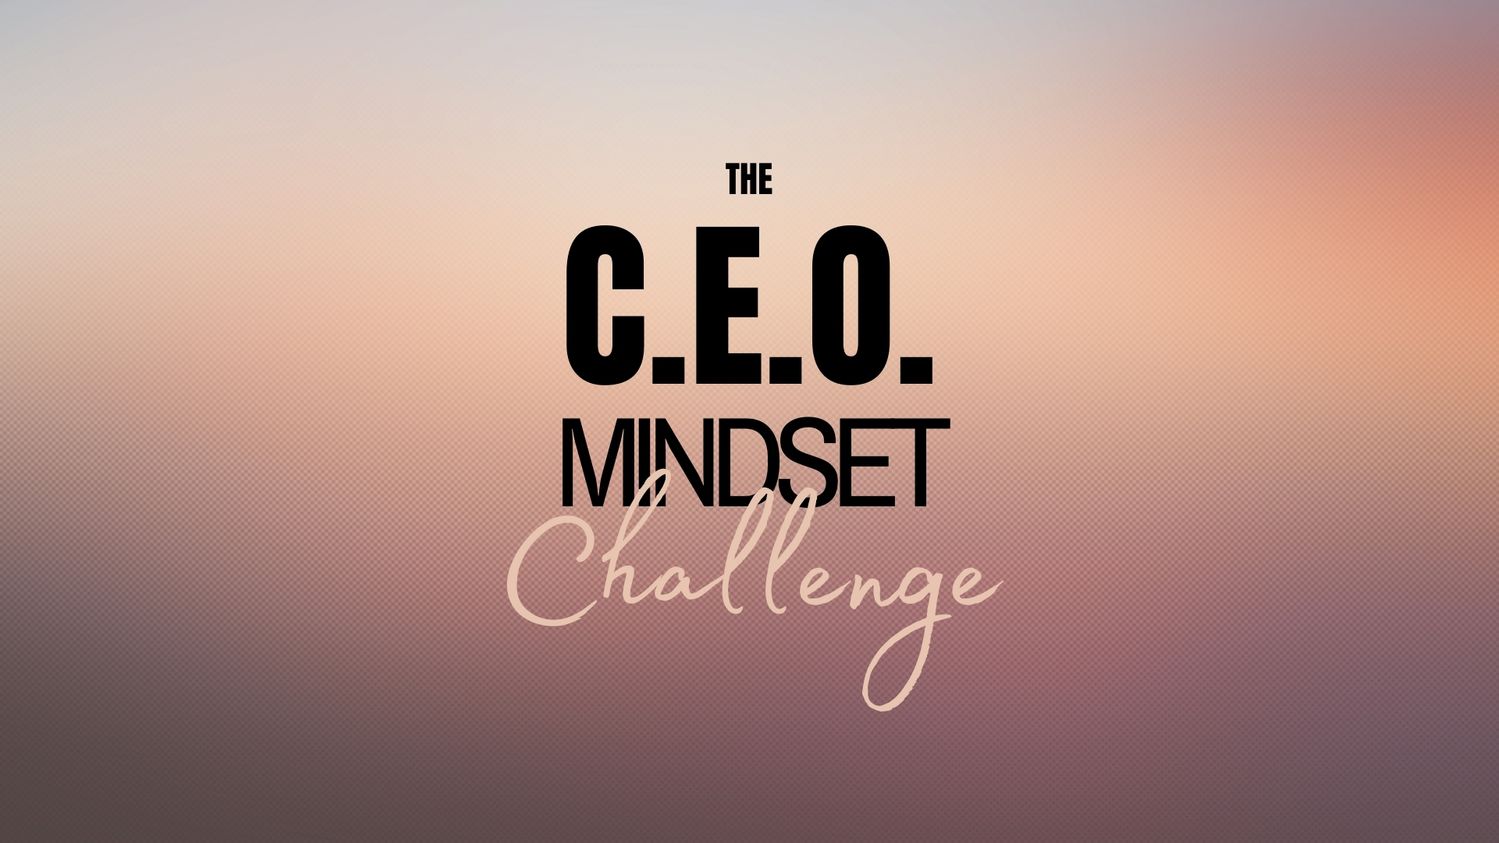 Get the ceo mindset and grow your business